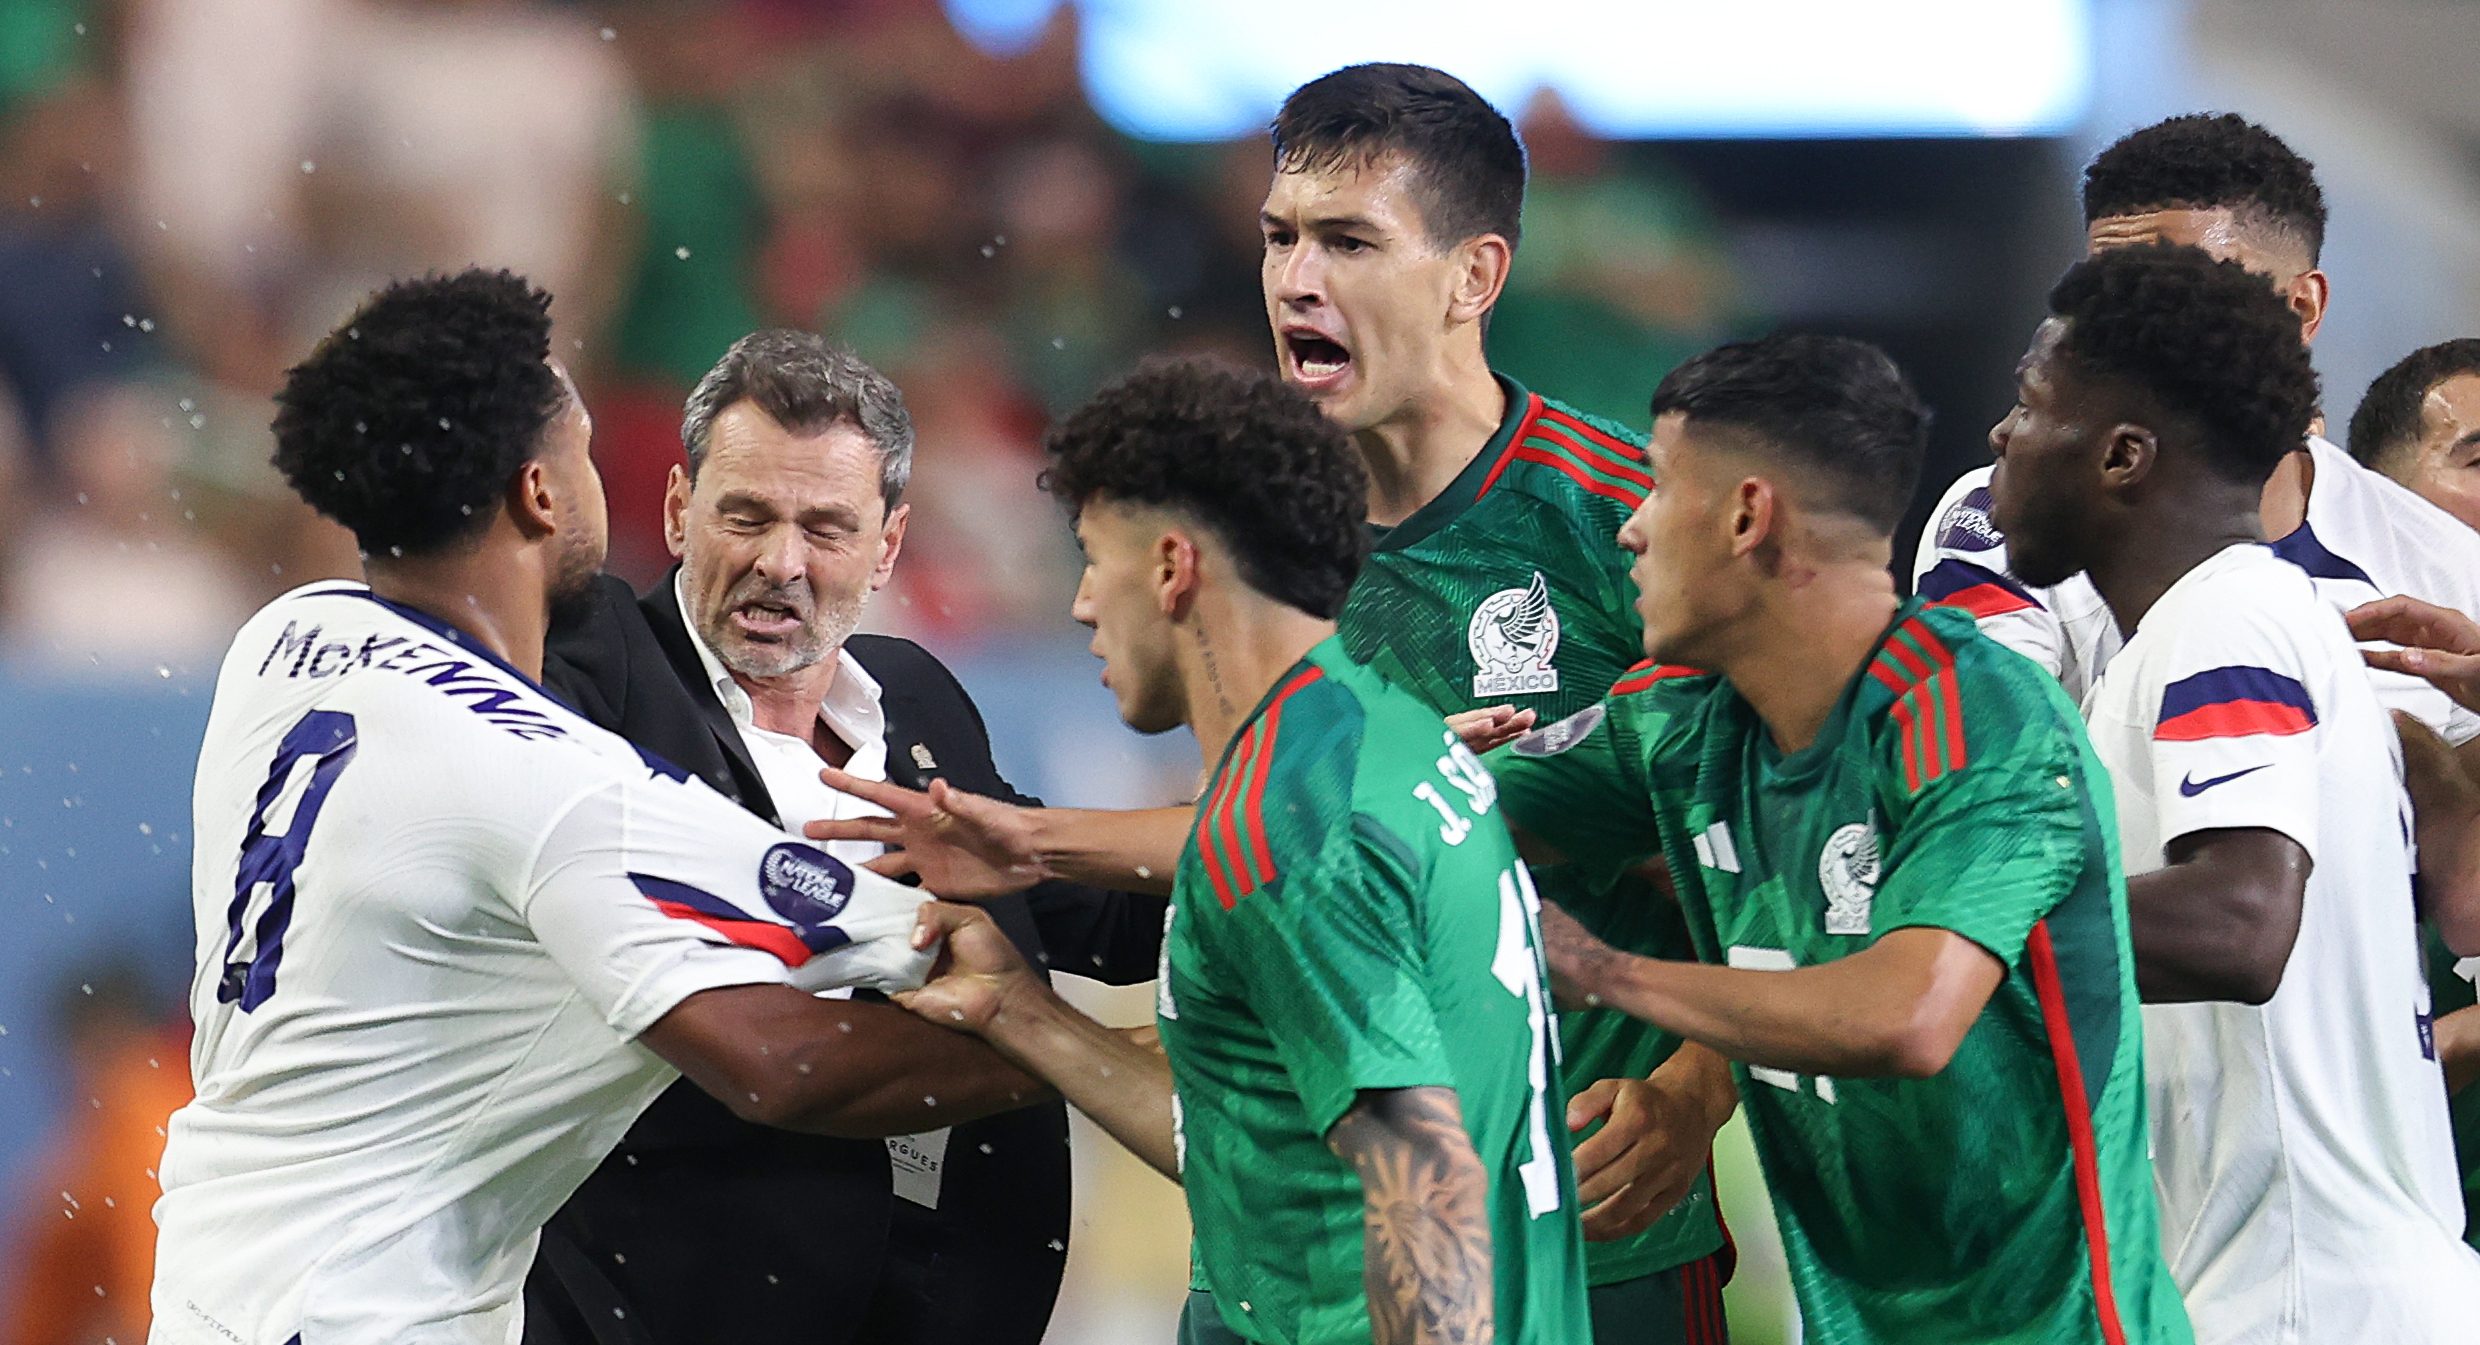 USMNT-Mexico Concacaf semifinal makes Twitter erupt – NBC Los Angeles